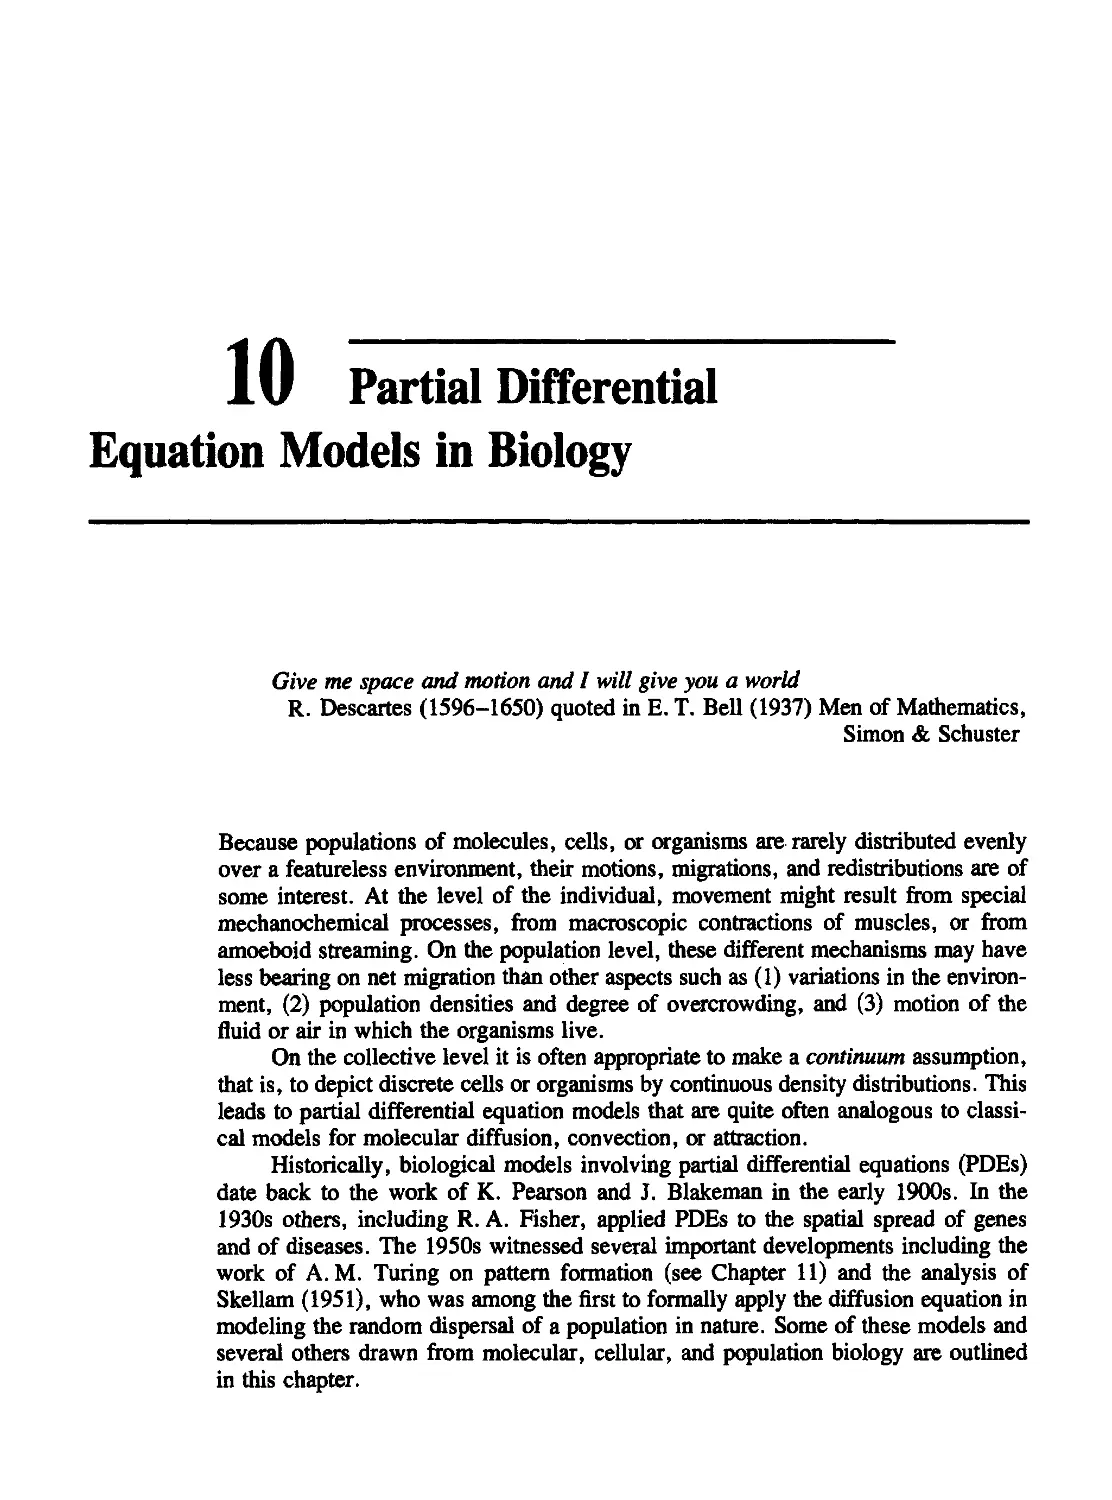 Chapter 10 Partial Differential Equation Models in Biology